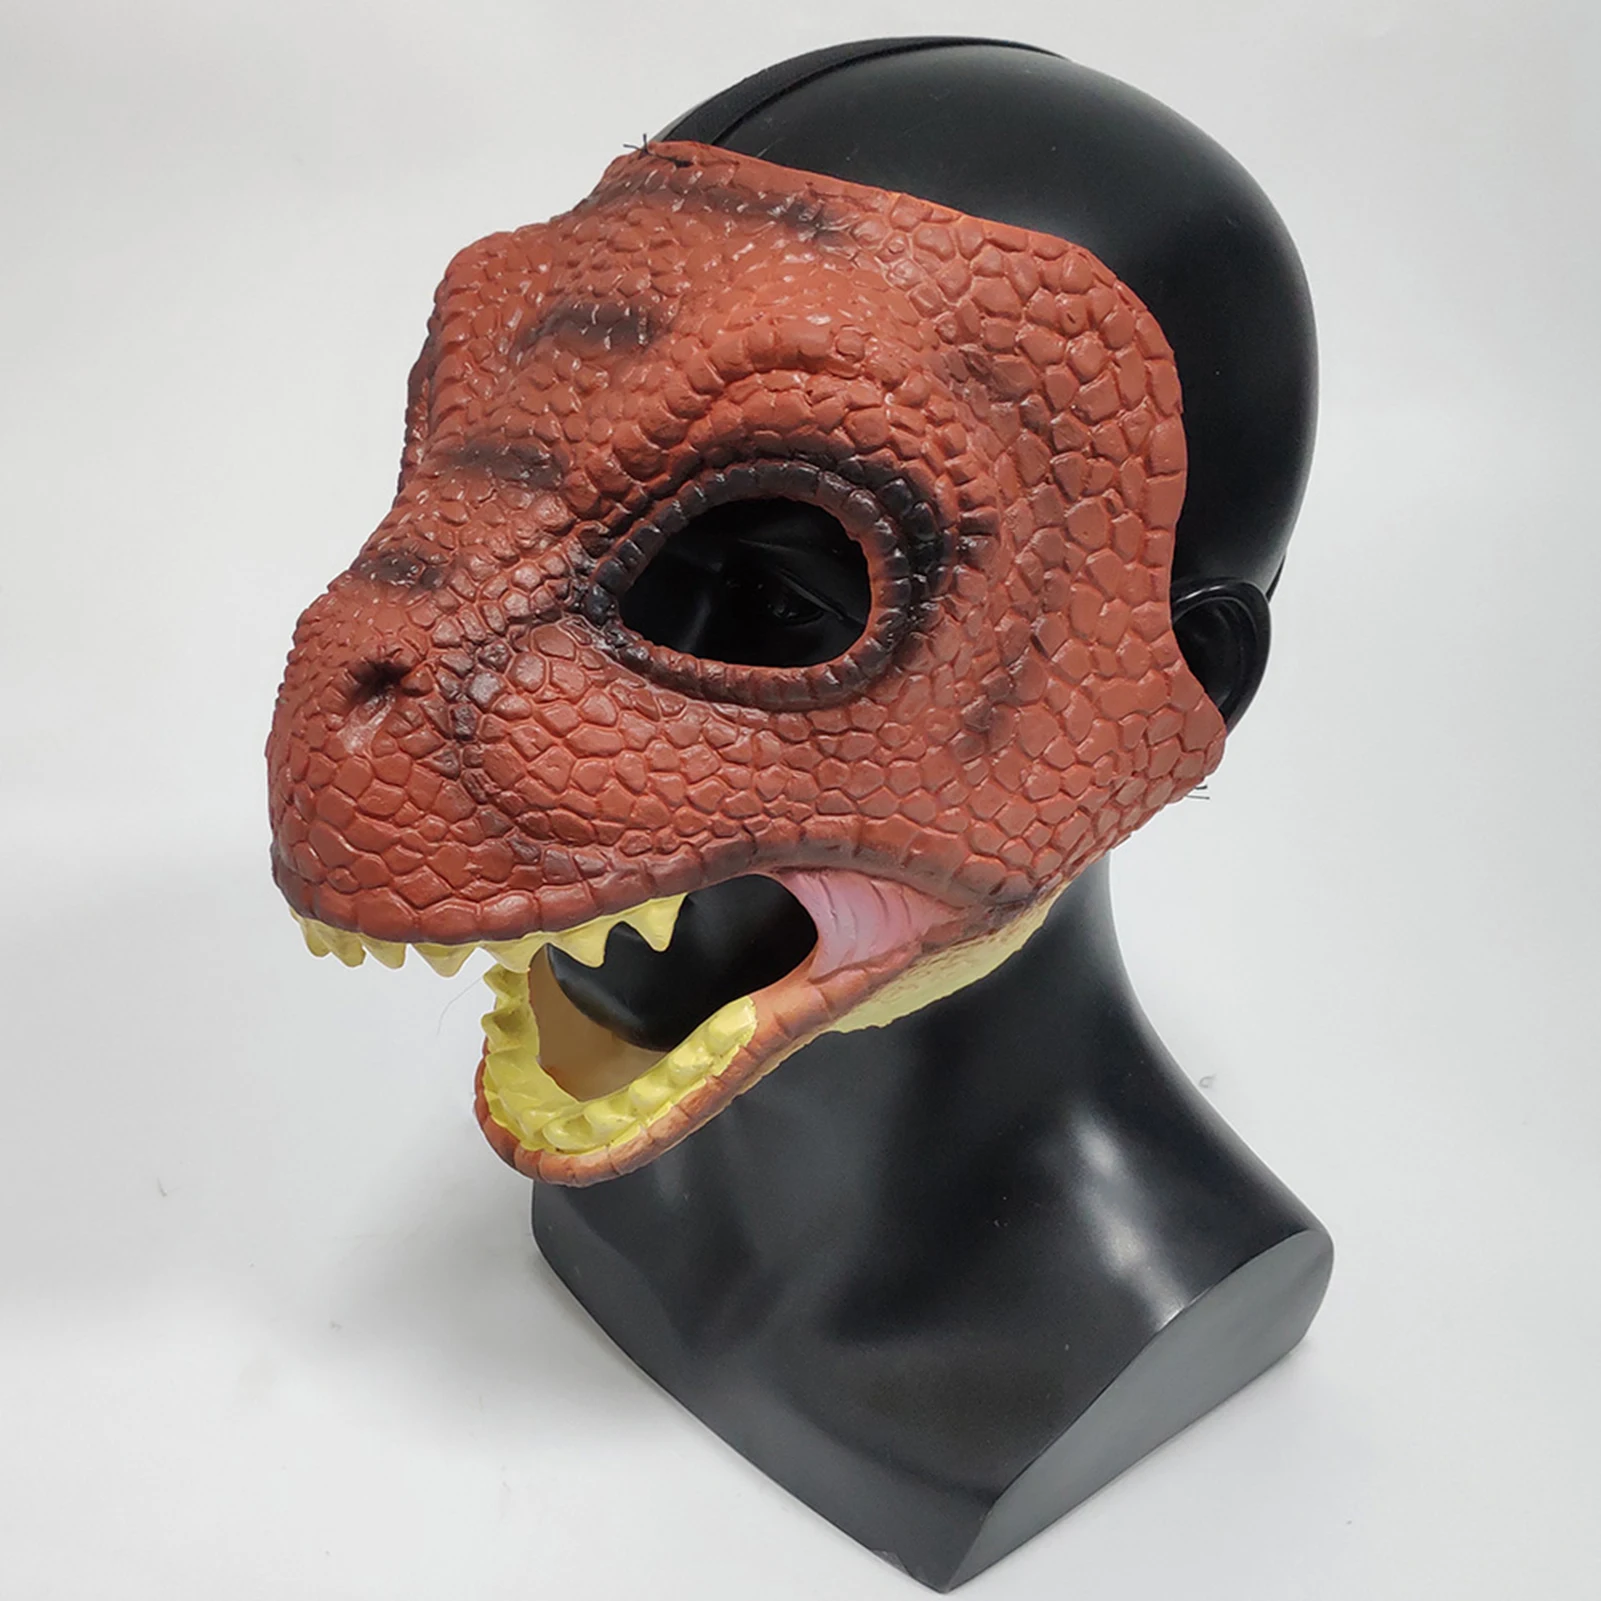 New Dragon Mask Movable Jaw Dino Mask Moving Jaw Dinosaur Decor Mask For  Halloween Party Cosplay Mask Decoration Funny Toy - Decorative Masks -  AliExpress